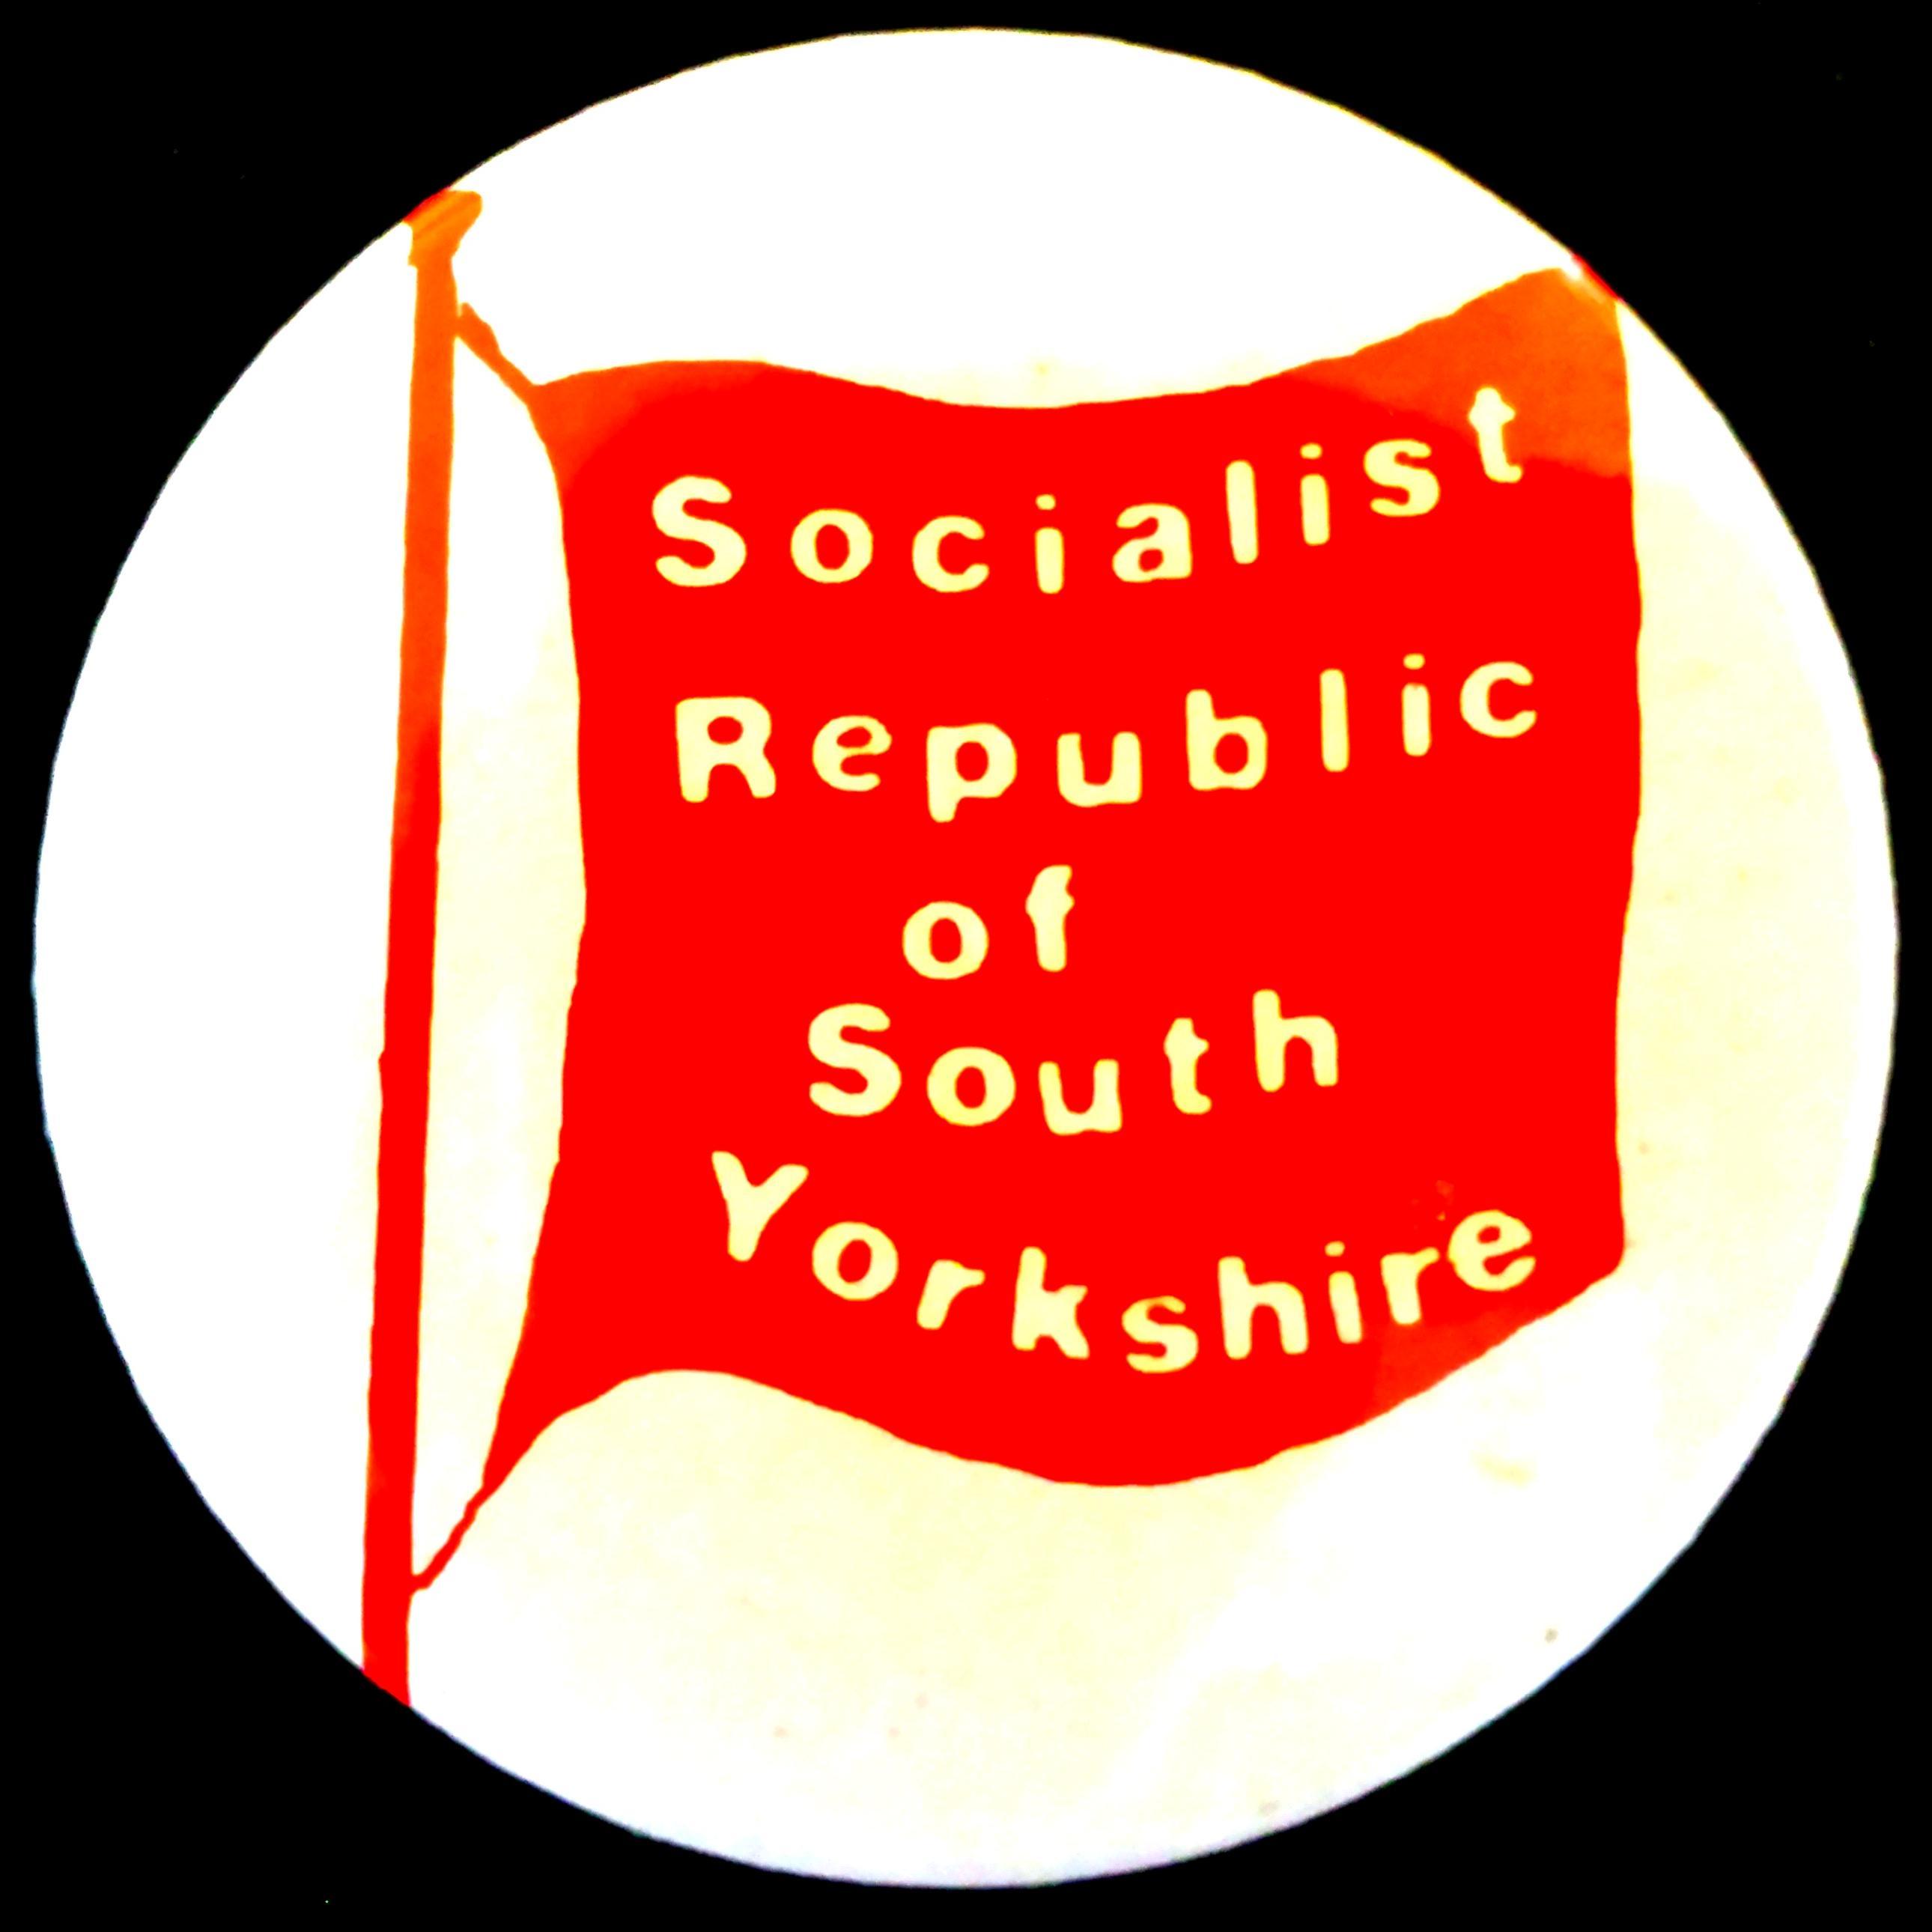 Vintage teen diary tweets from deep within the Socialist Republic of South Yorkshire, 1979-1986. As written every bedtime by @noiseheatpower.